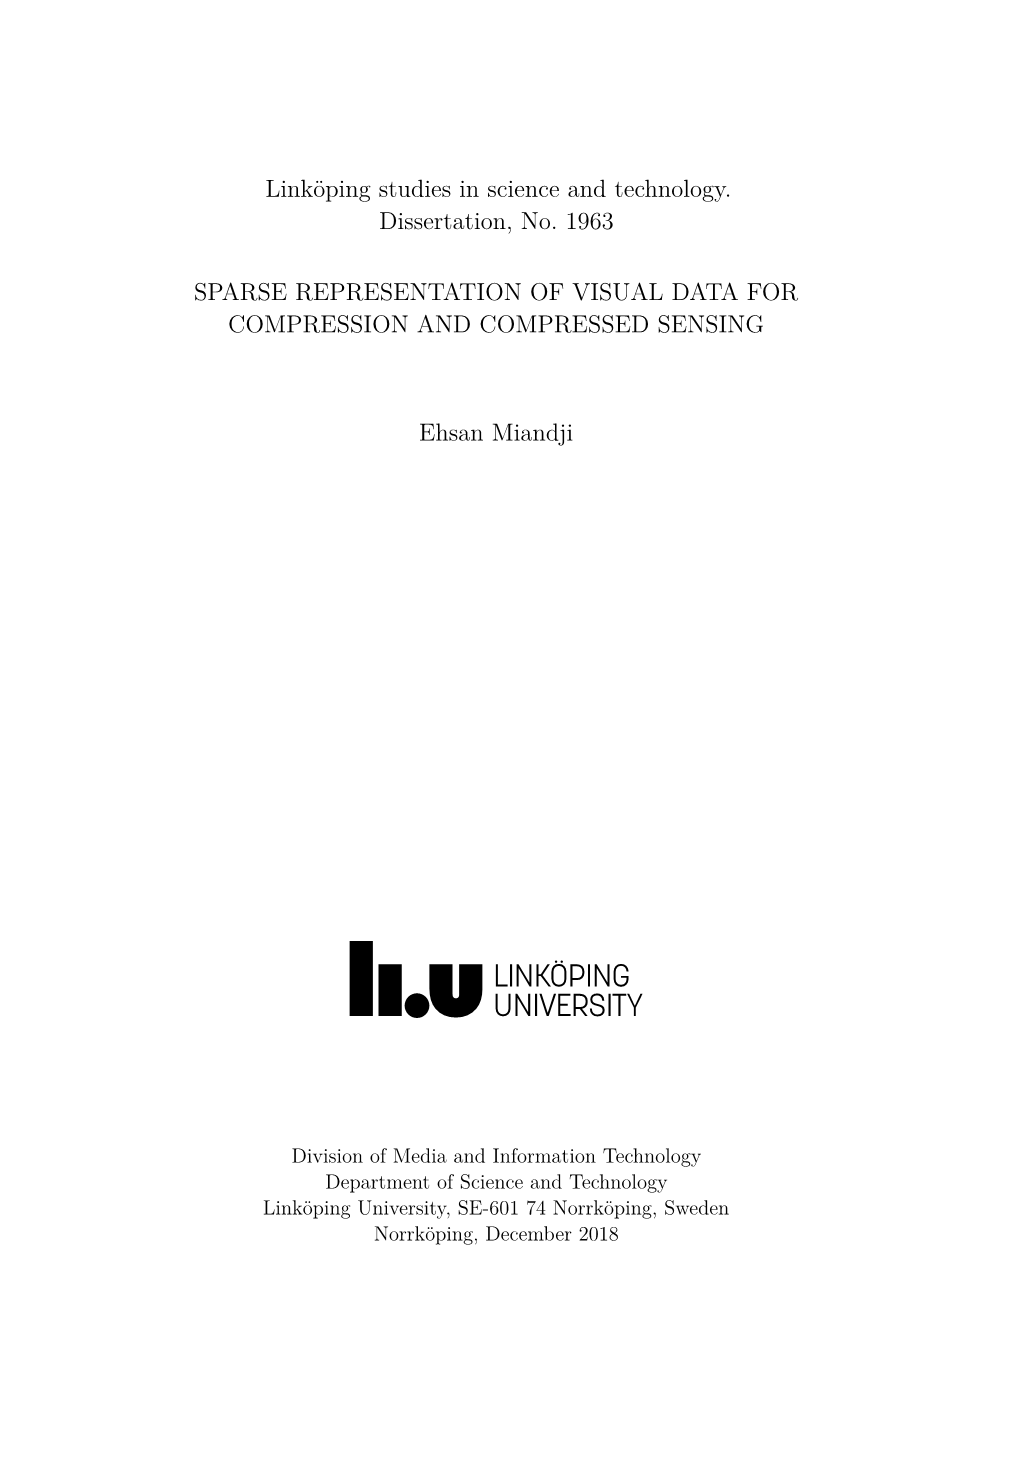 Sparse Representation of Visual Data for Compression and Compressed Sensing